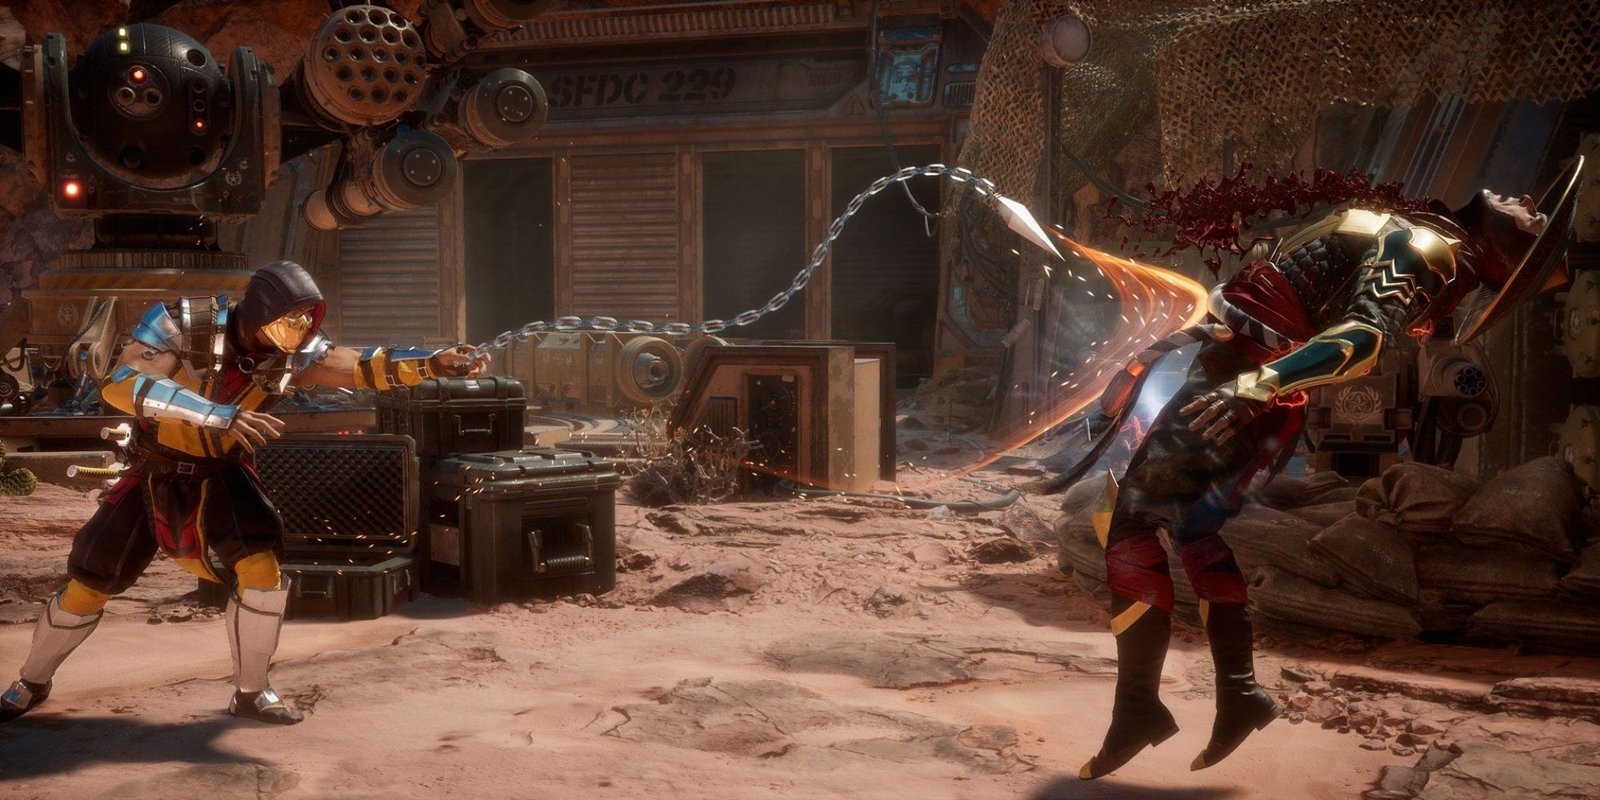 Mortal Kombat 11 - An image of two characters fighting, one of which being Scorpion.